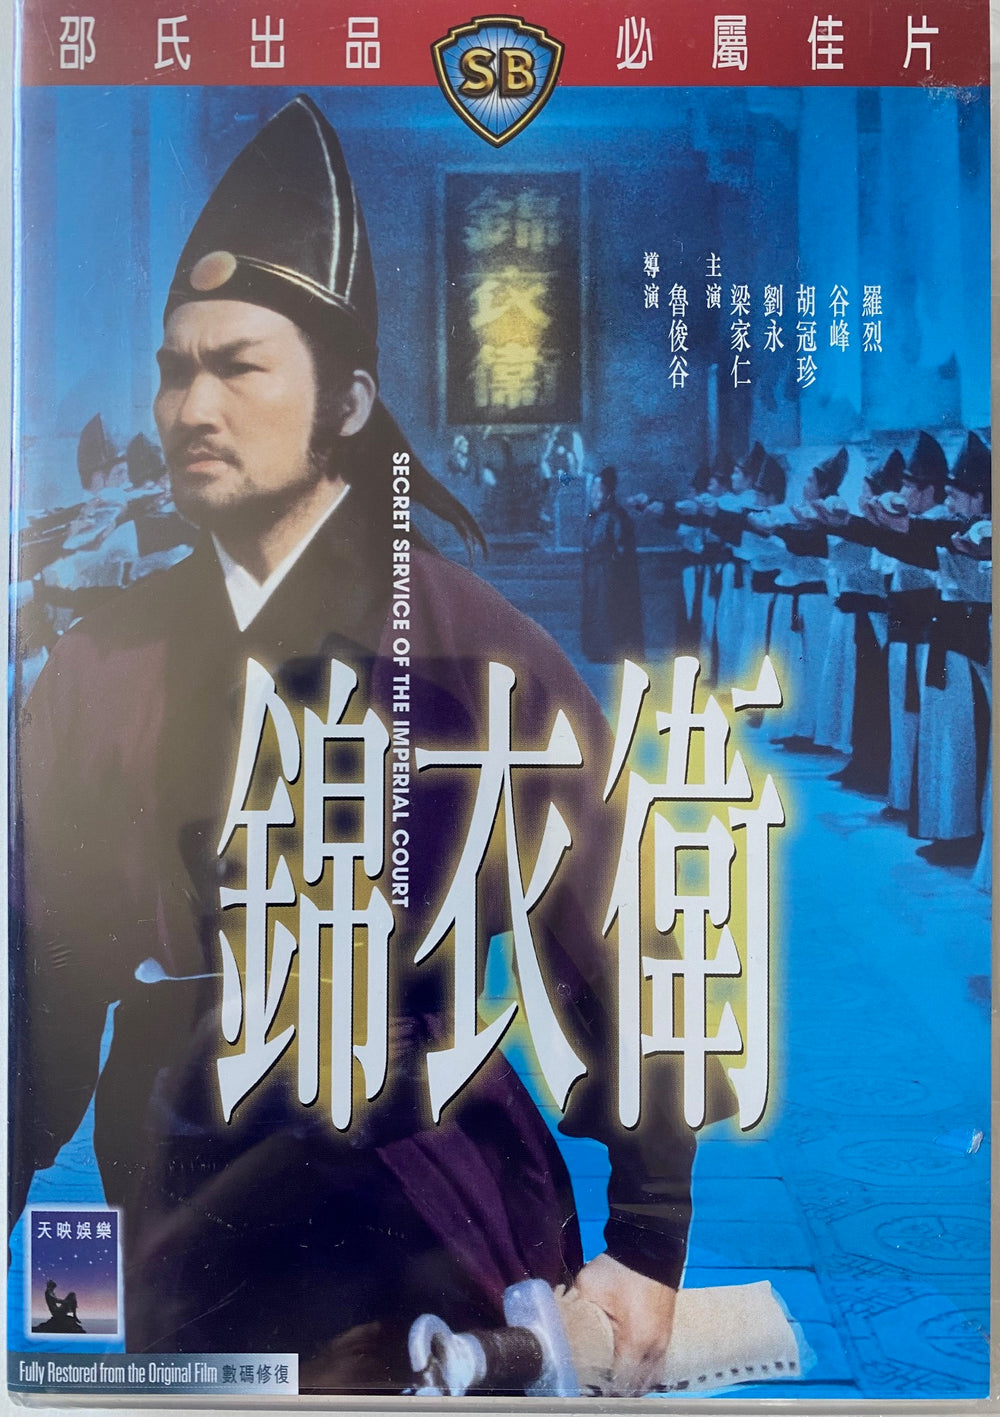 Secret Service of The Imperial Court 錦衣衛 (SHAW BROS) DVD ENGLISH SUBTITLES (REGION 3)